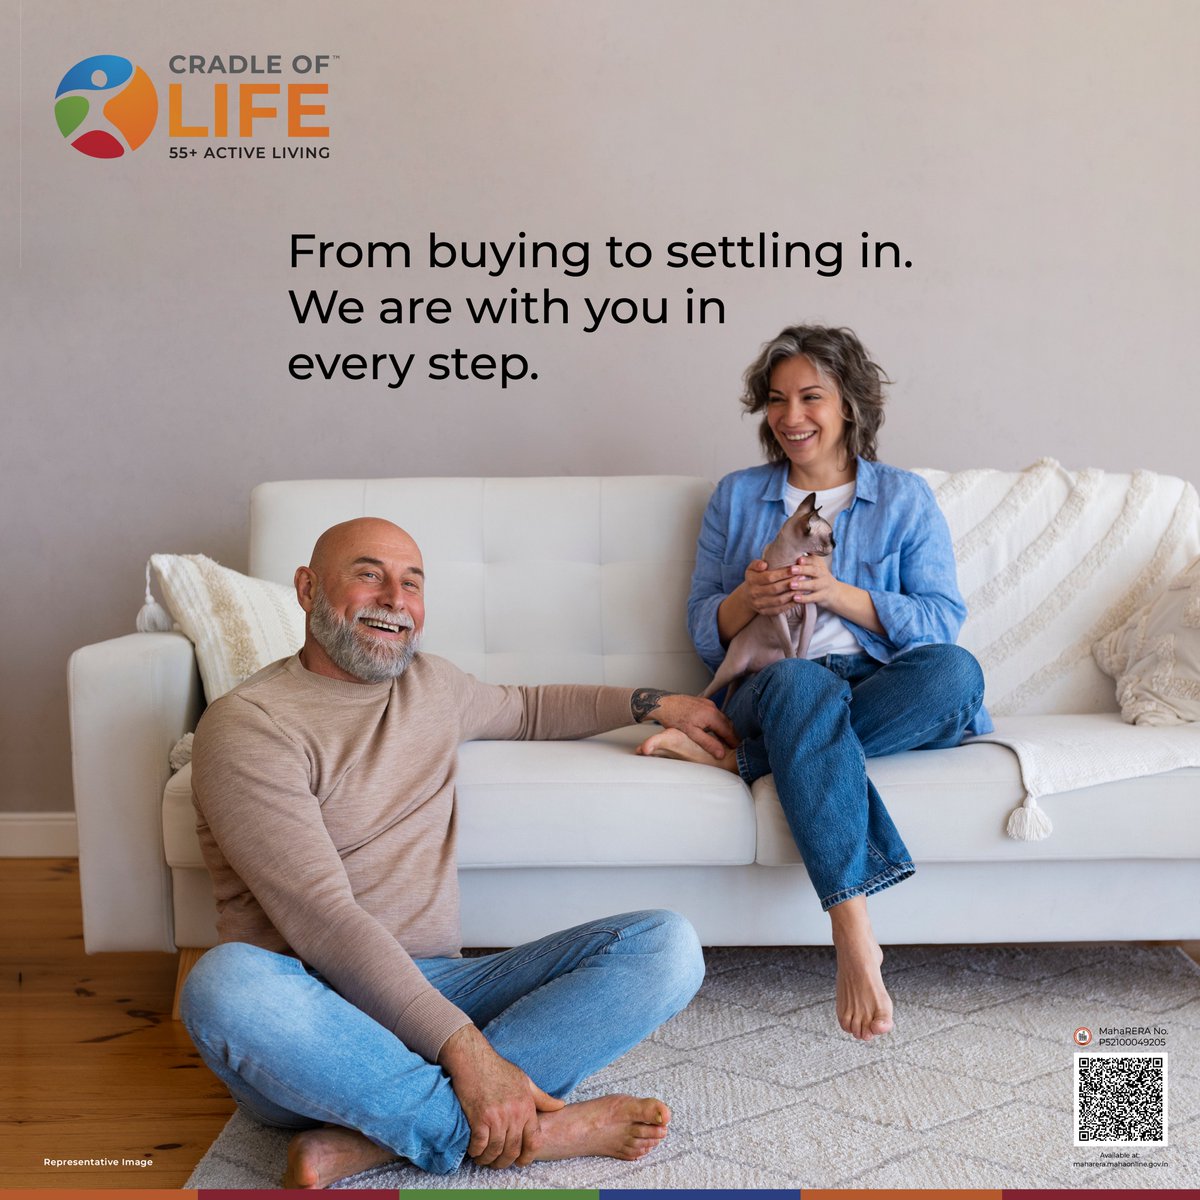 Discover the future of senior living at Cradle of Life, where comfort and personalized care create a truly exceptional experience.

MahaRERA No: P52100049205

#JoyfulLiving #ActiveLiving #DynamicLiving #CradleOfLife #SeniorLiving #TimeForYourself